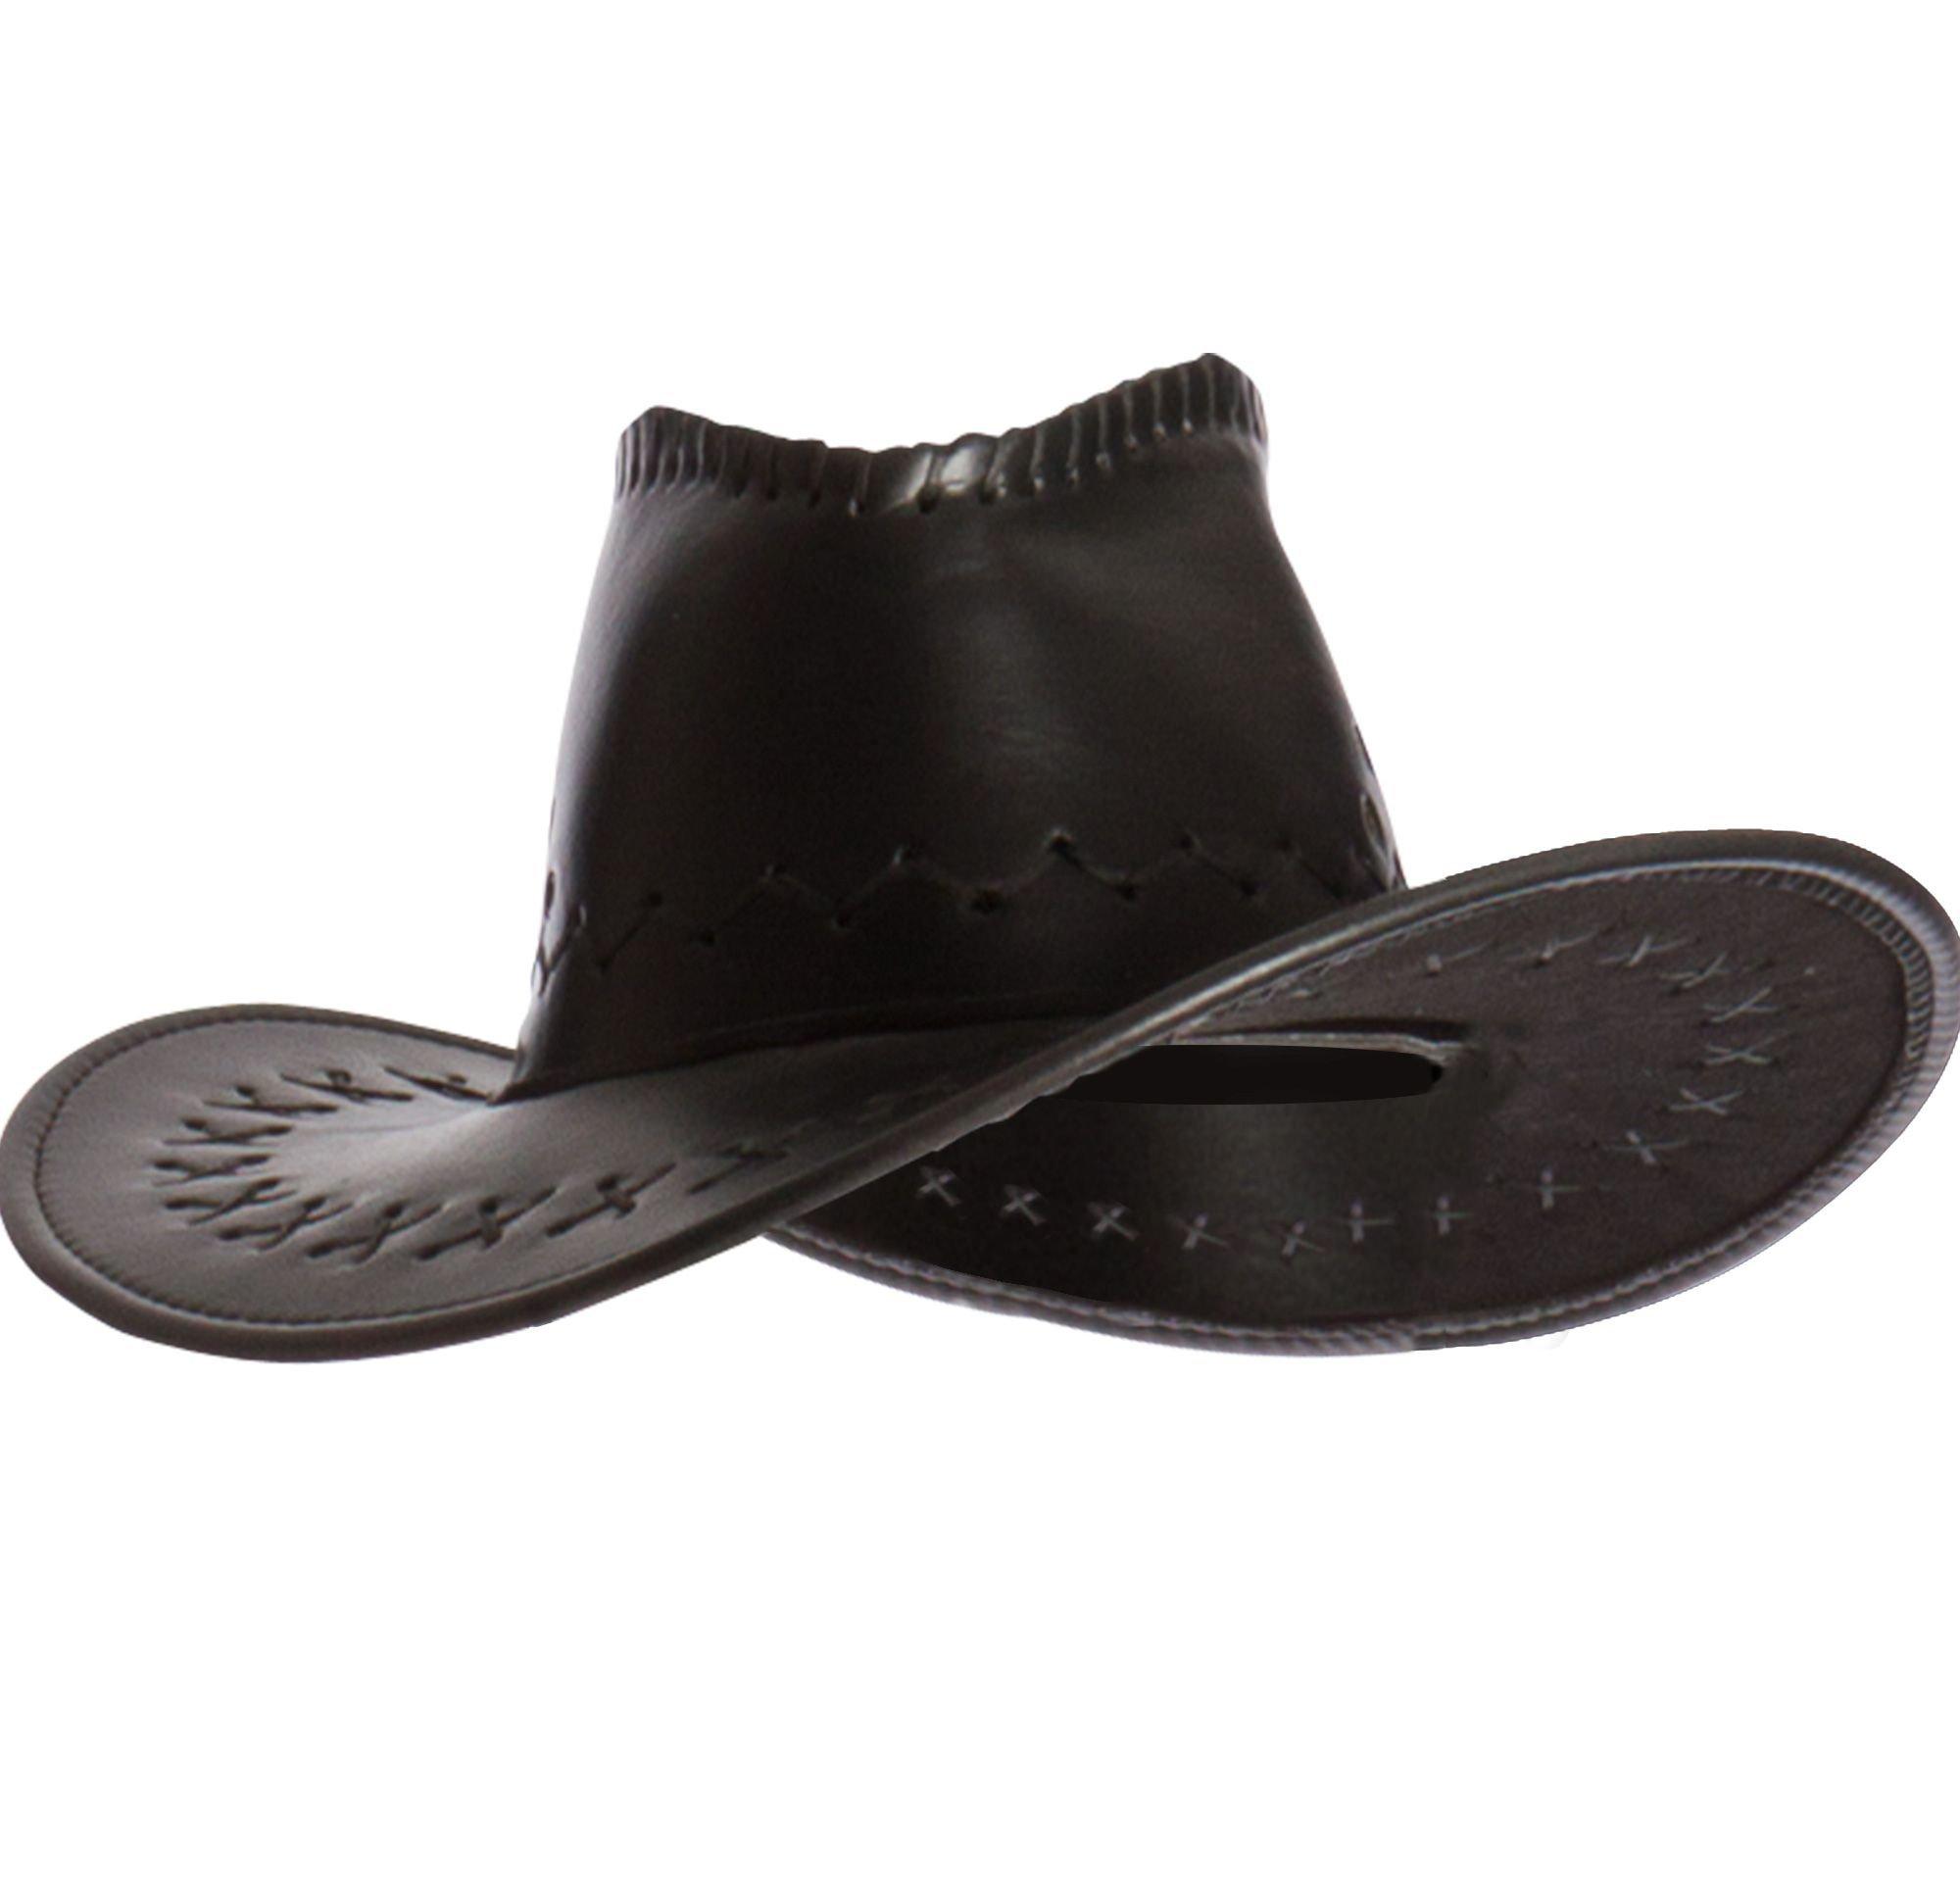 Leather Cowboy Hat - Free Daz Content by zombietaggerung